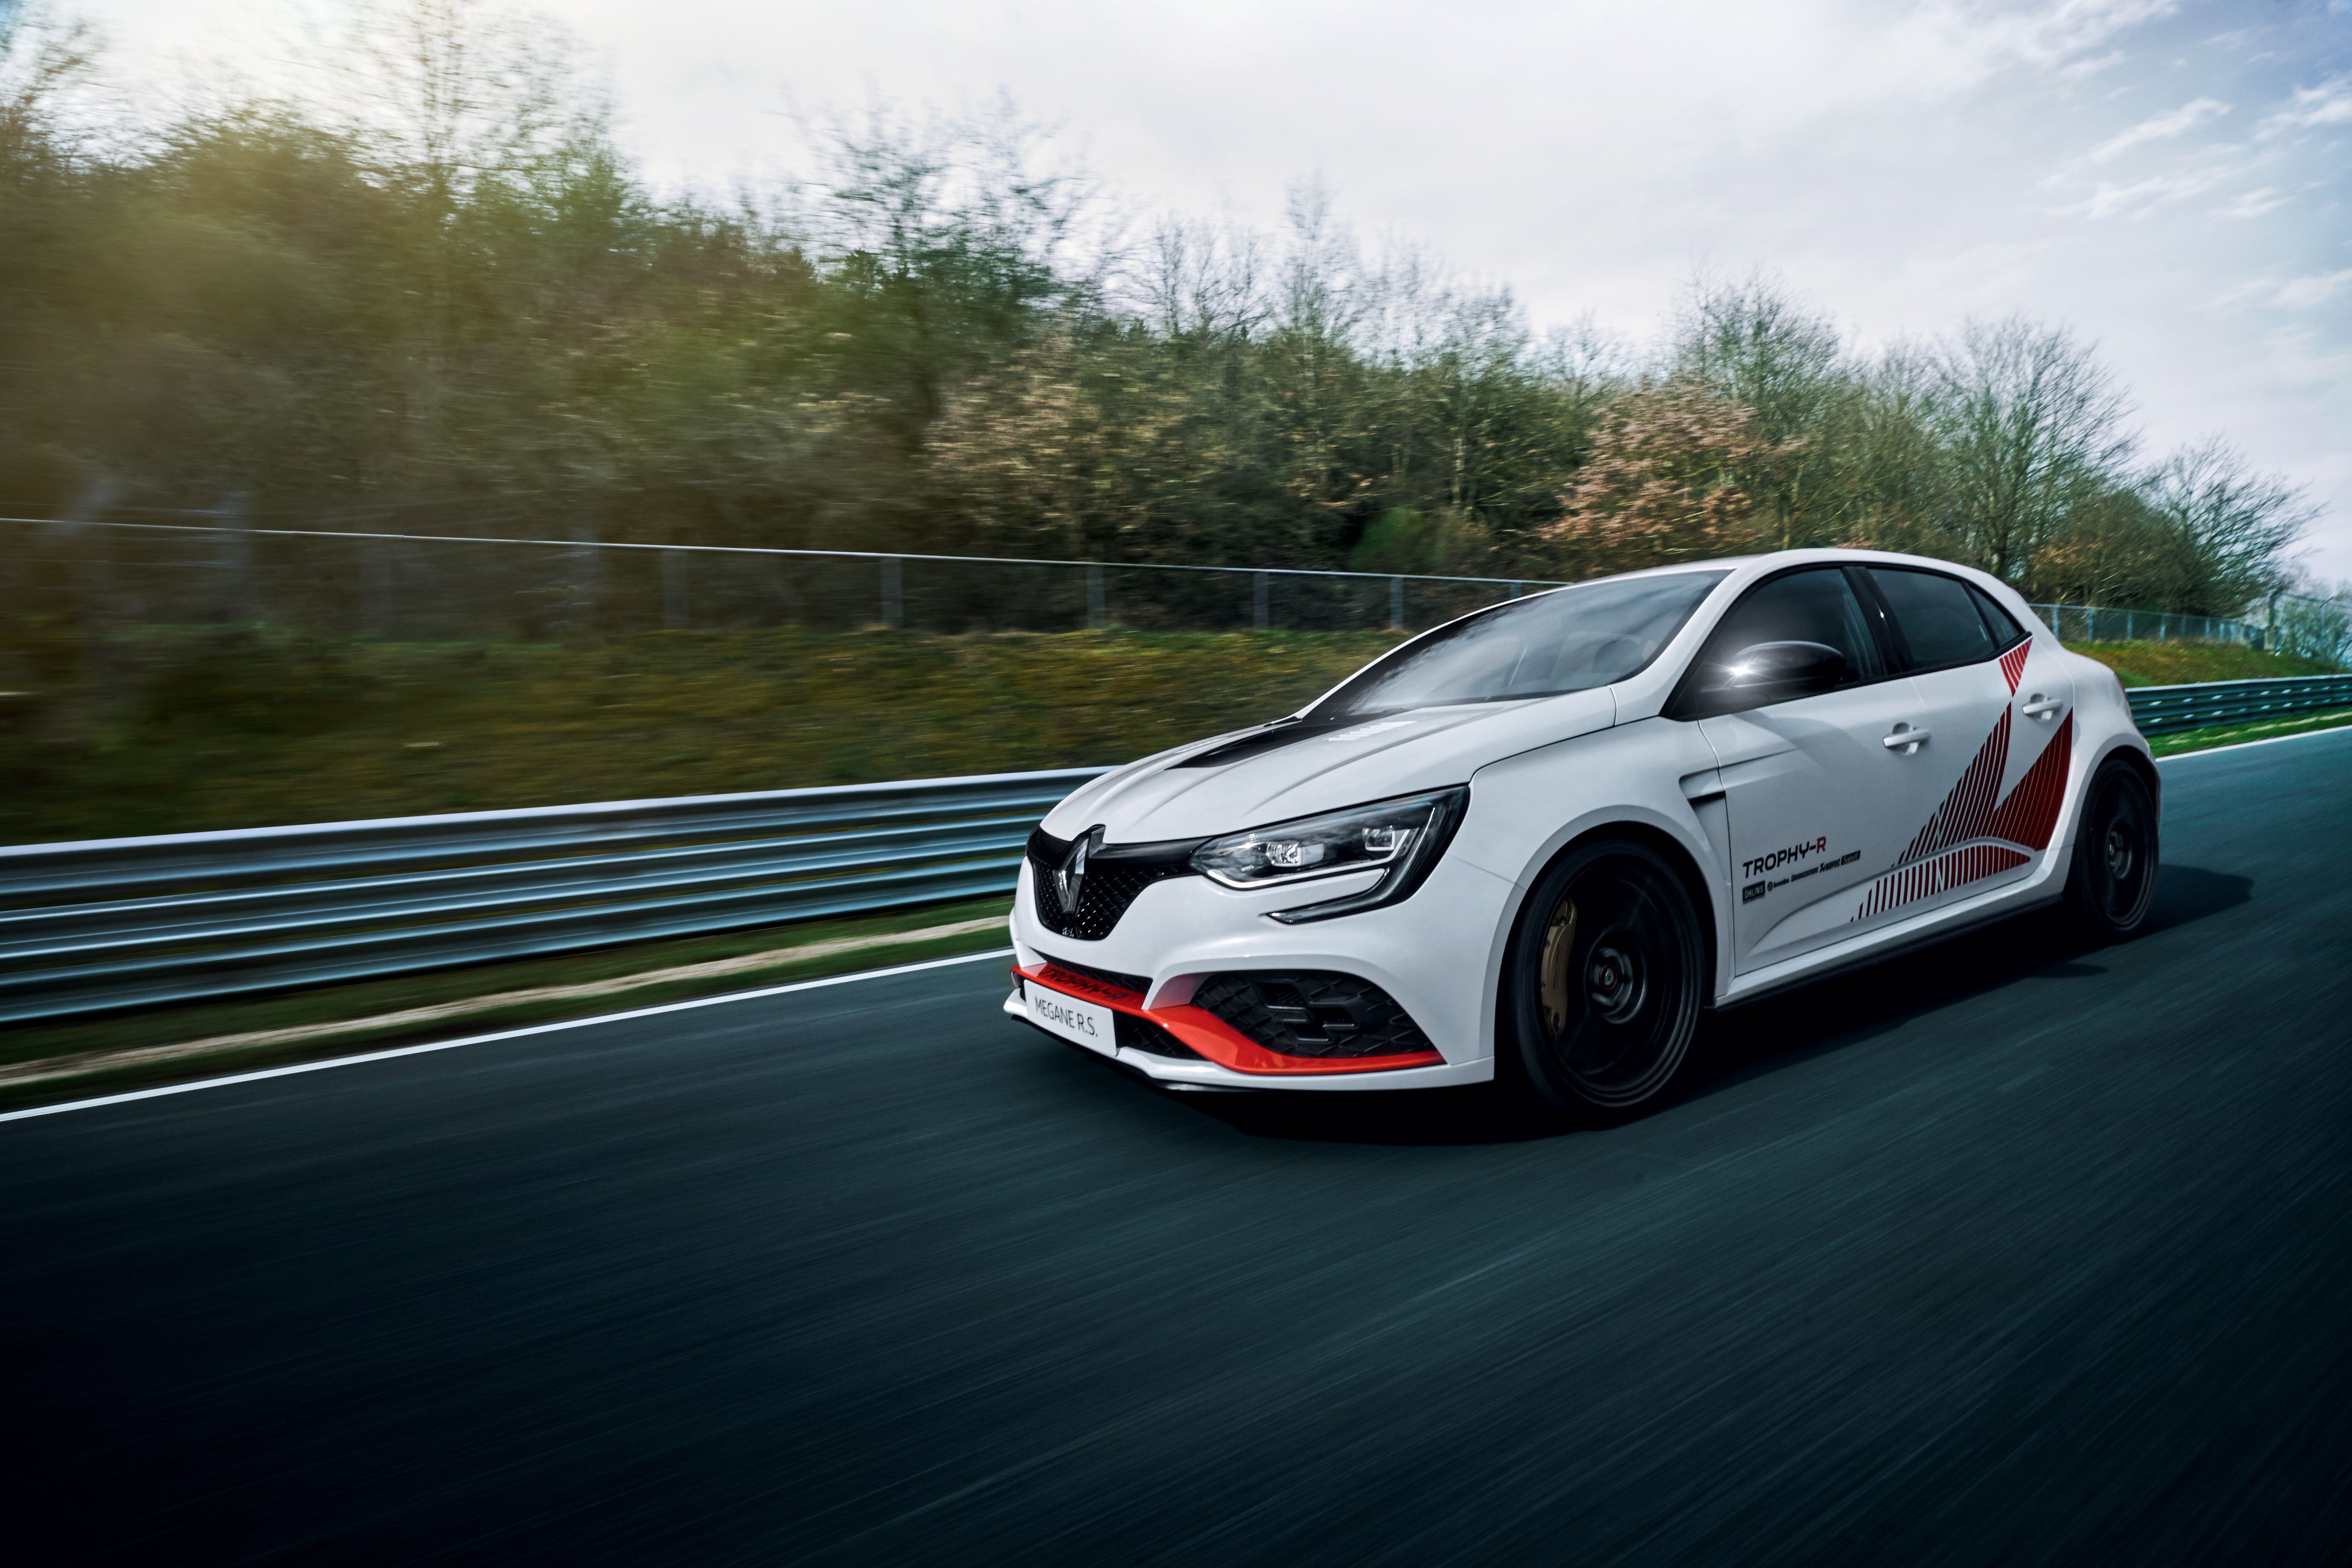 2020 Wallpaper of the Day: 2019 Renault Megane R.S. Trophy-R